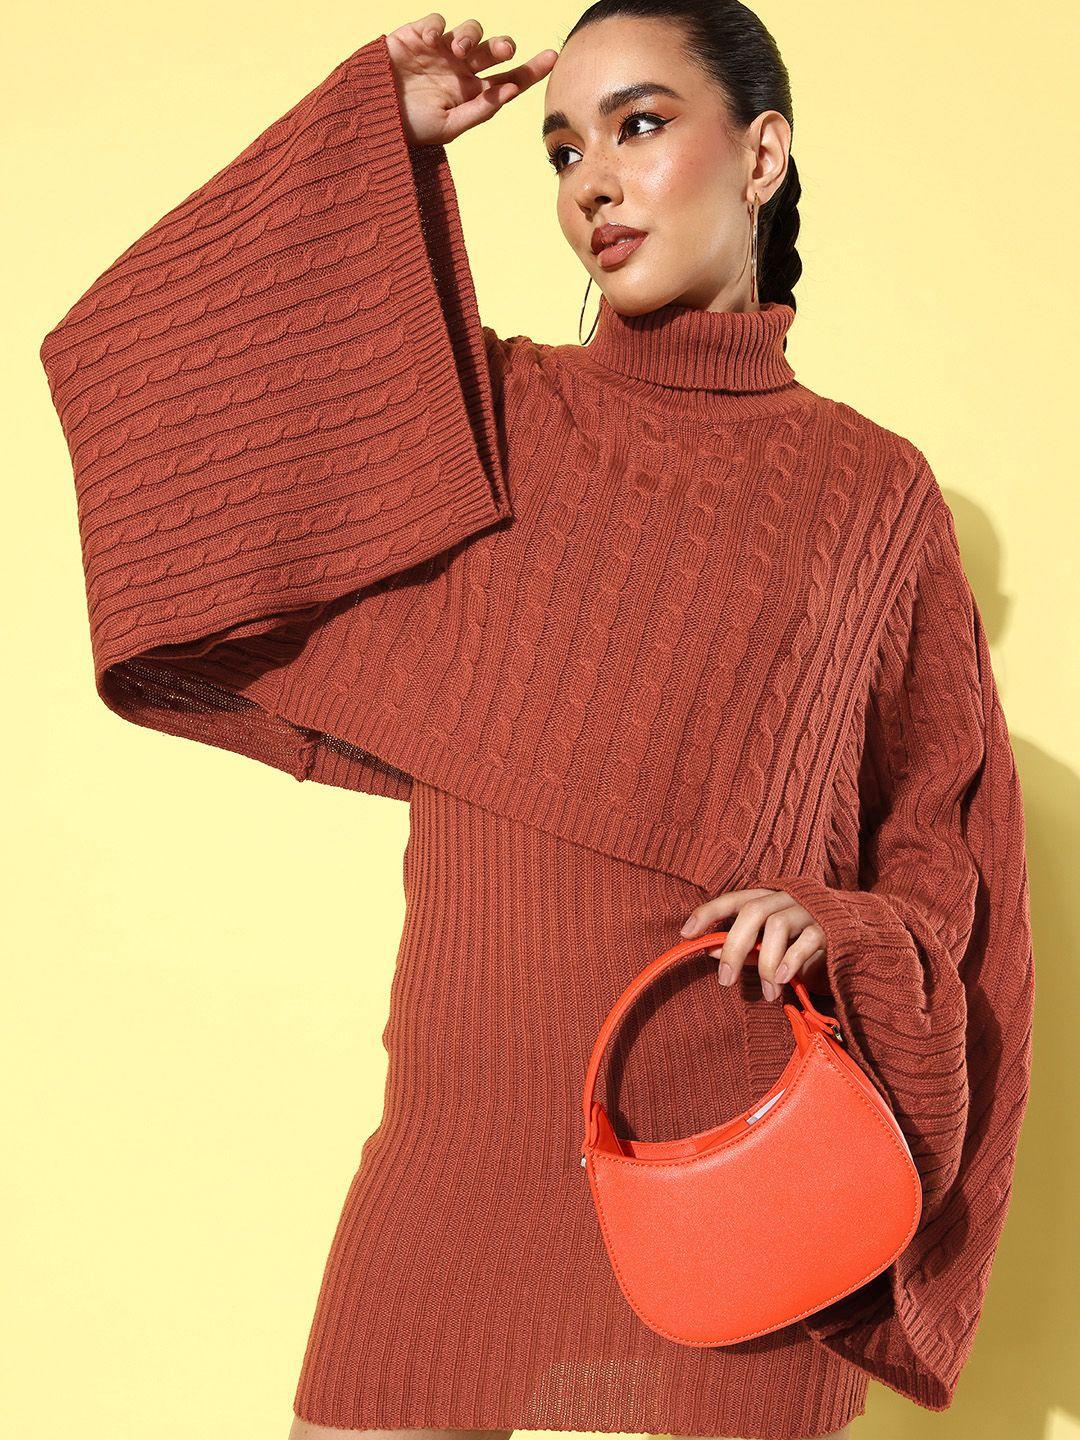 4wrd by dressberry knitted bodycon jumper dress comes with a cover-up poncho